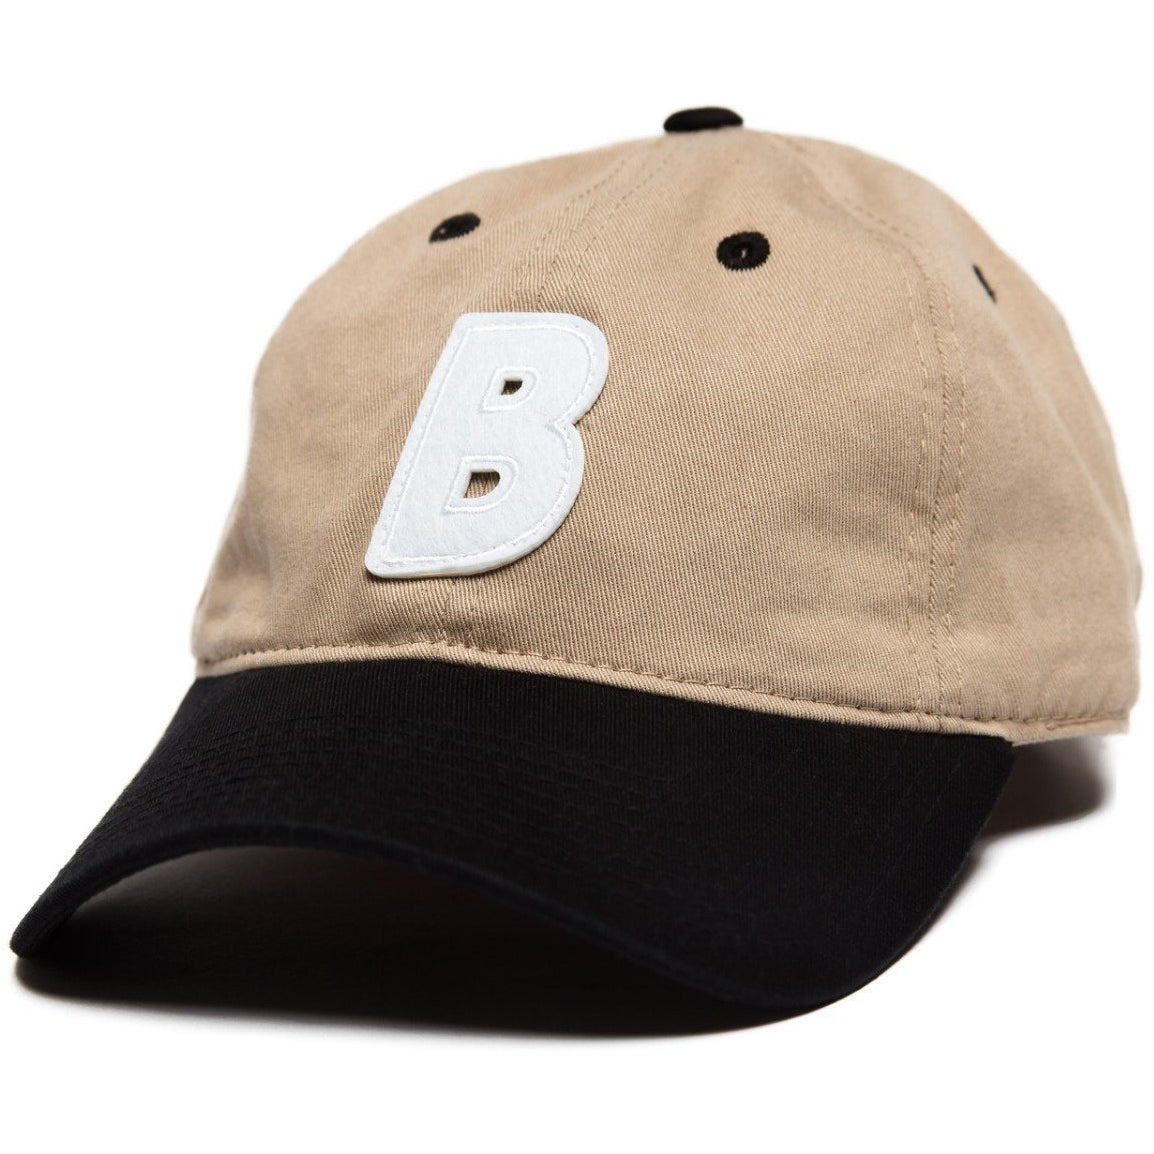 6-panel unconstructed Cotton tan beige black dad hat featuring BLED letter logo felt patch on the front and BLED logo embroidered on the back with adjustable strap closure. skate, skateboarding, hype, streetwear